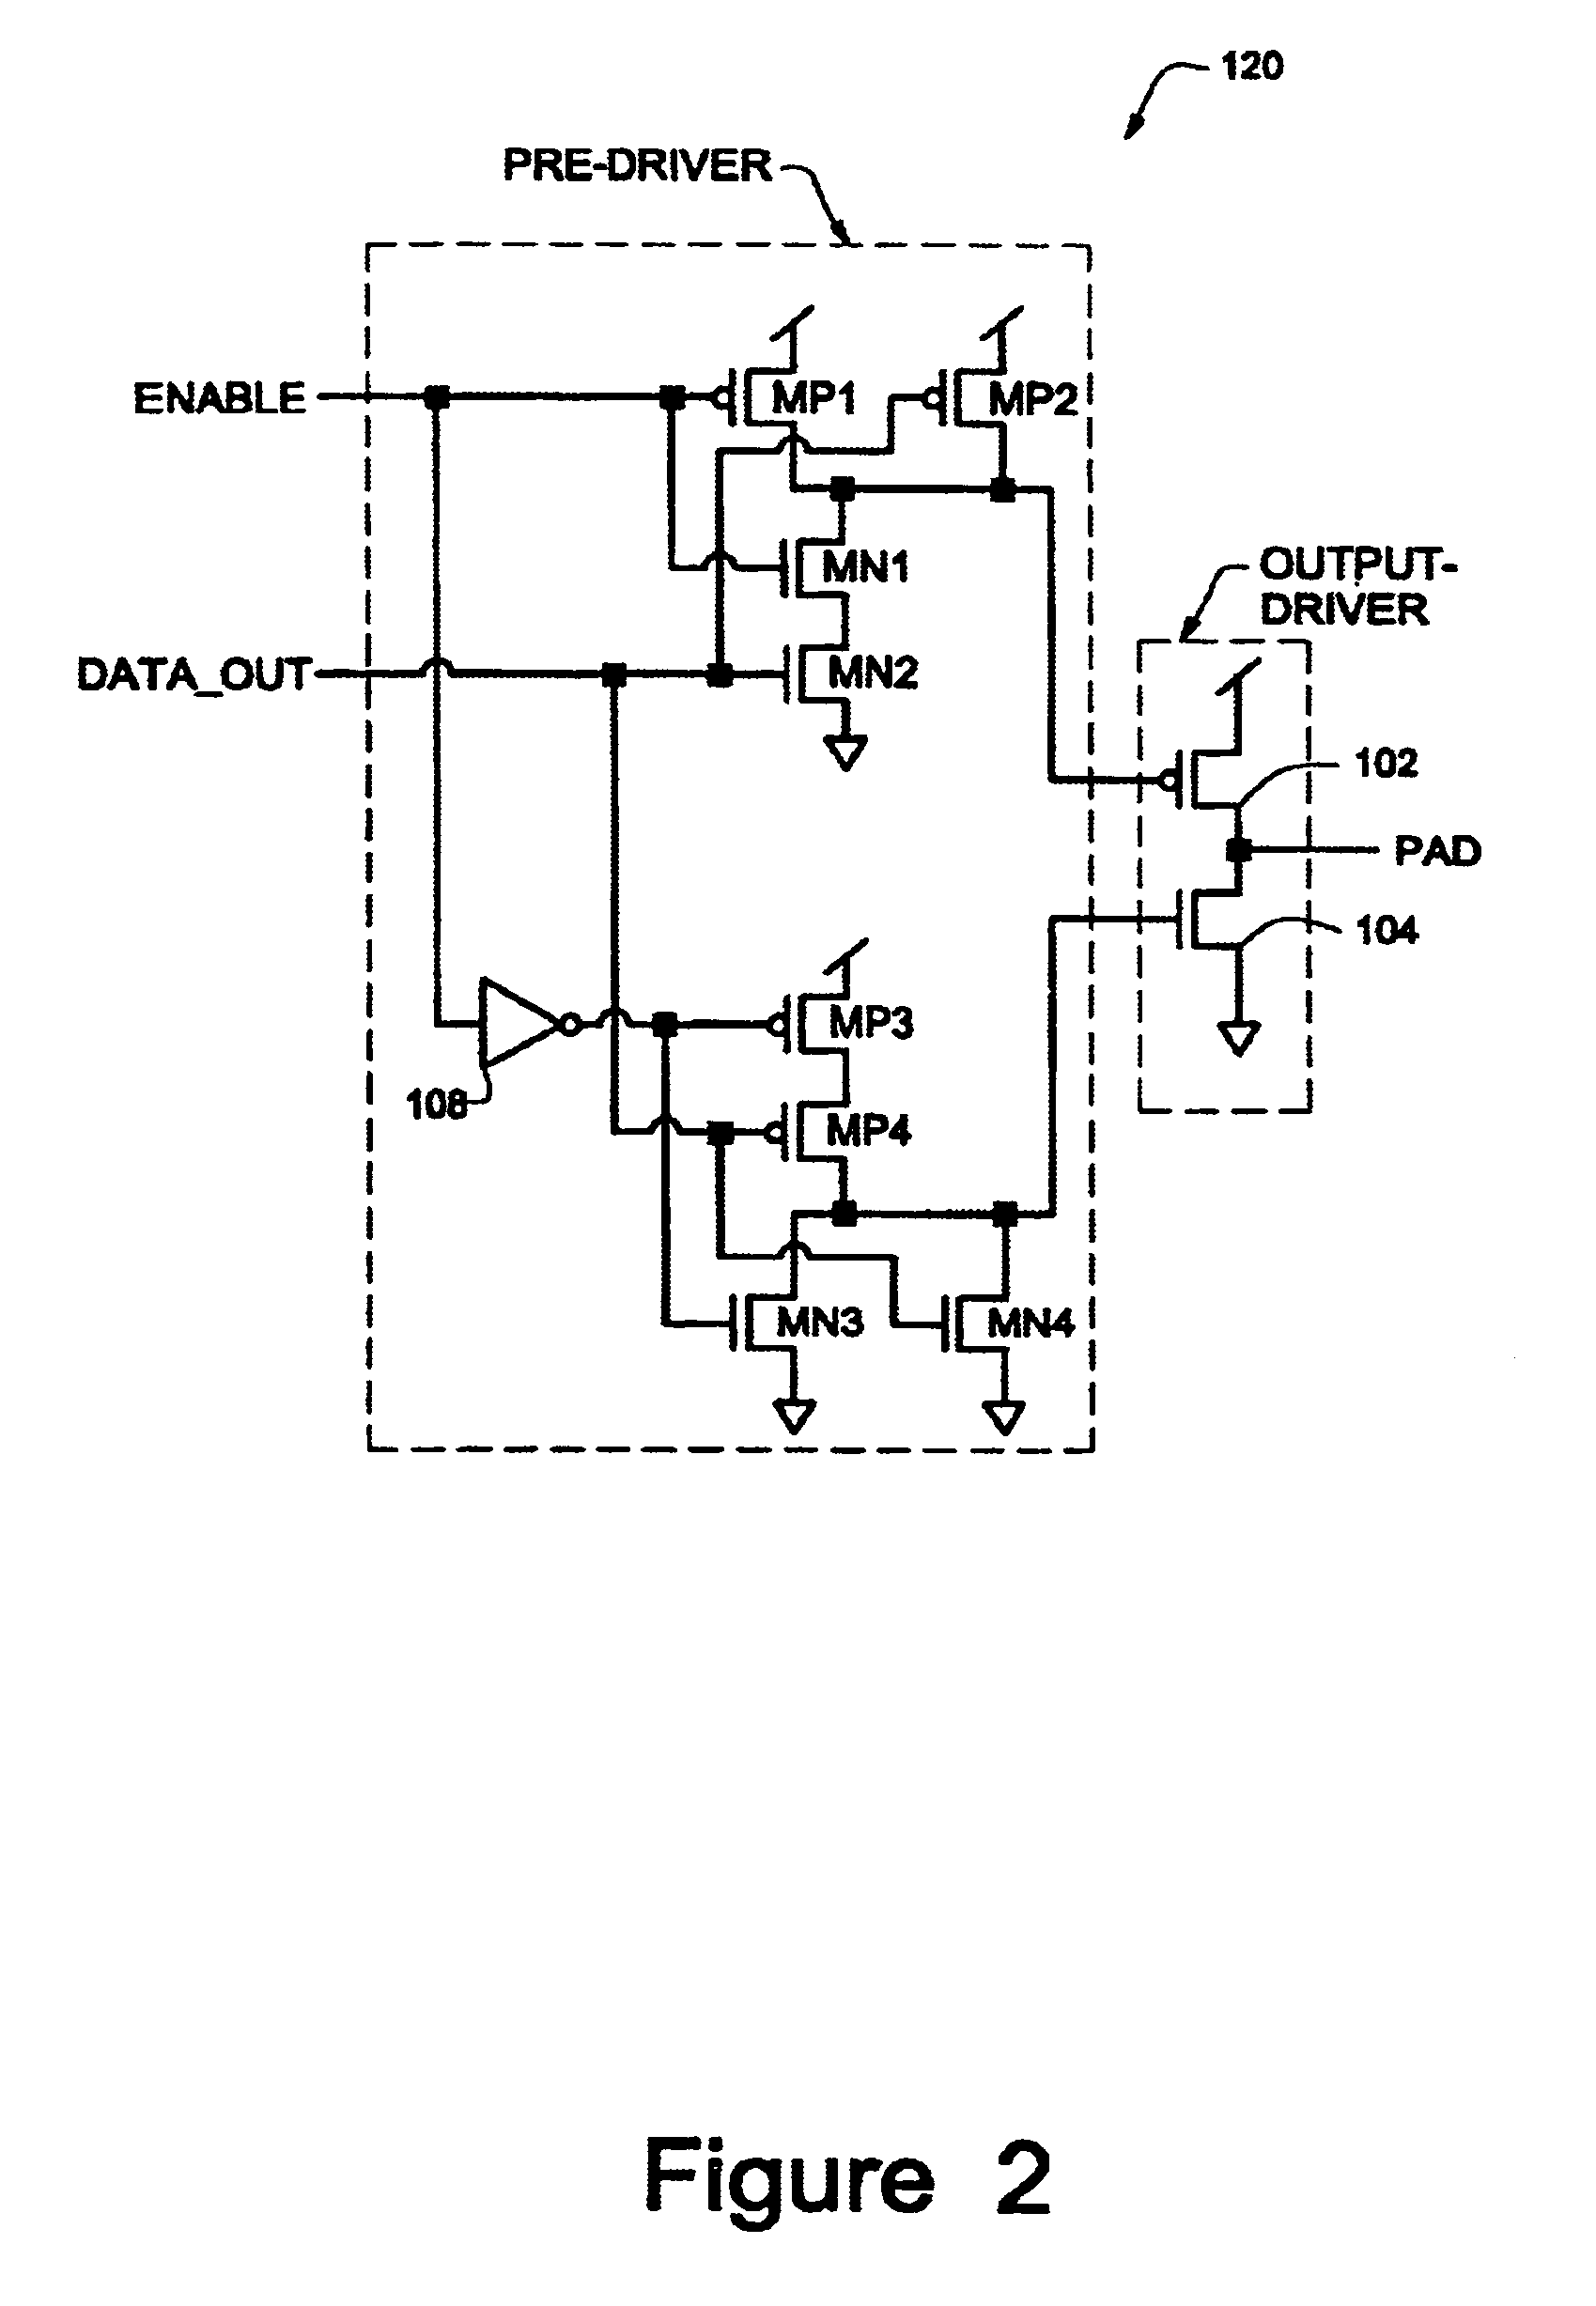 Apparatus and method for a programmable trip point in an I/O circuit using a pre-driver